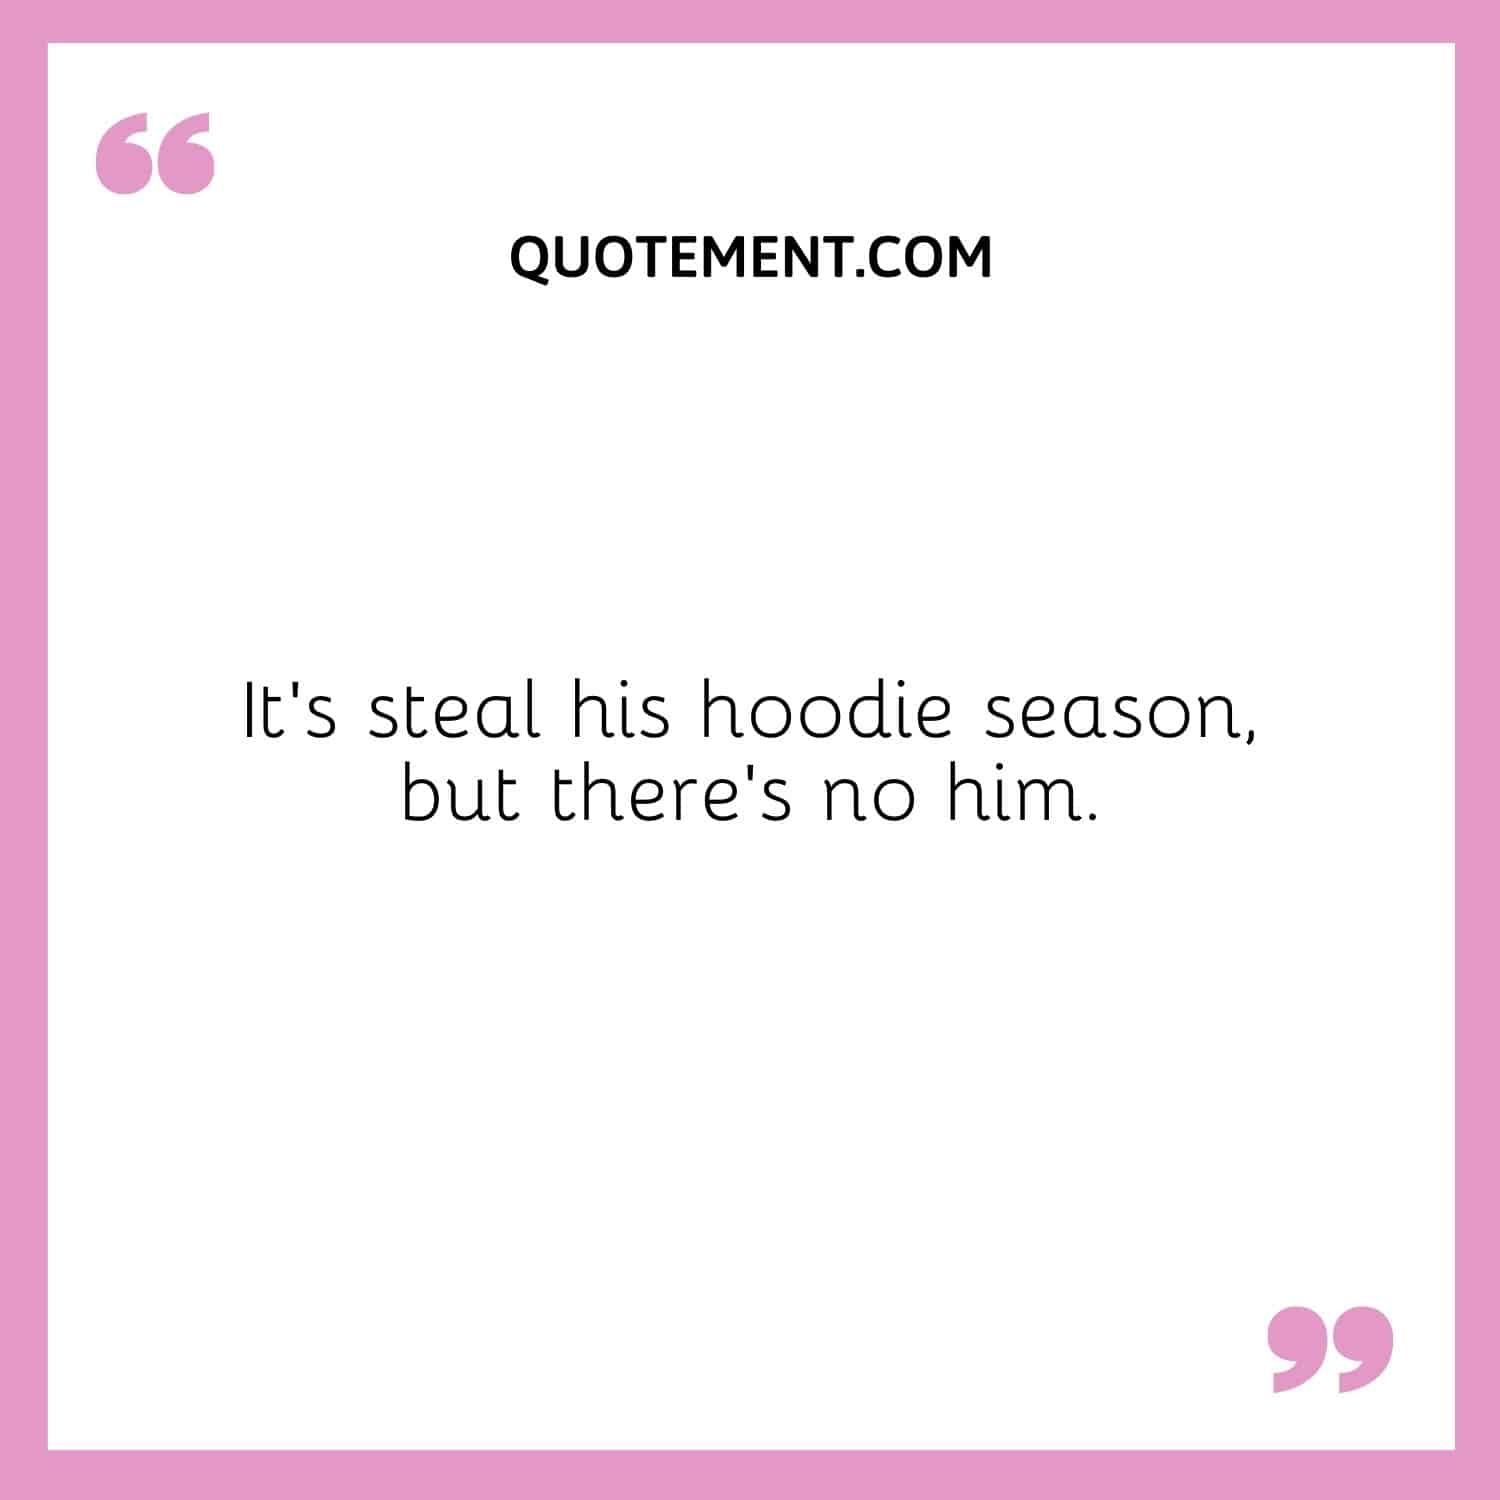 It’s steal his hoodie season, but there’s no him